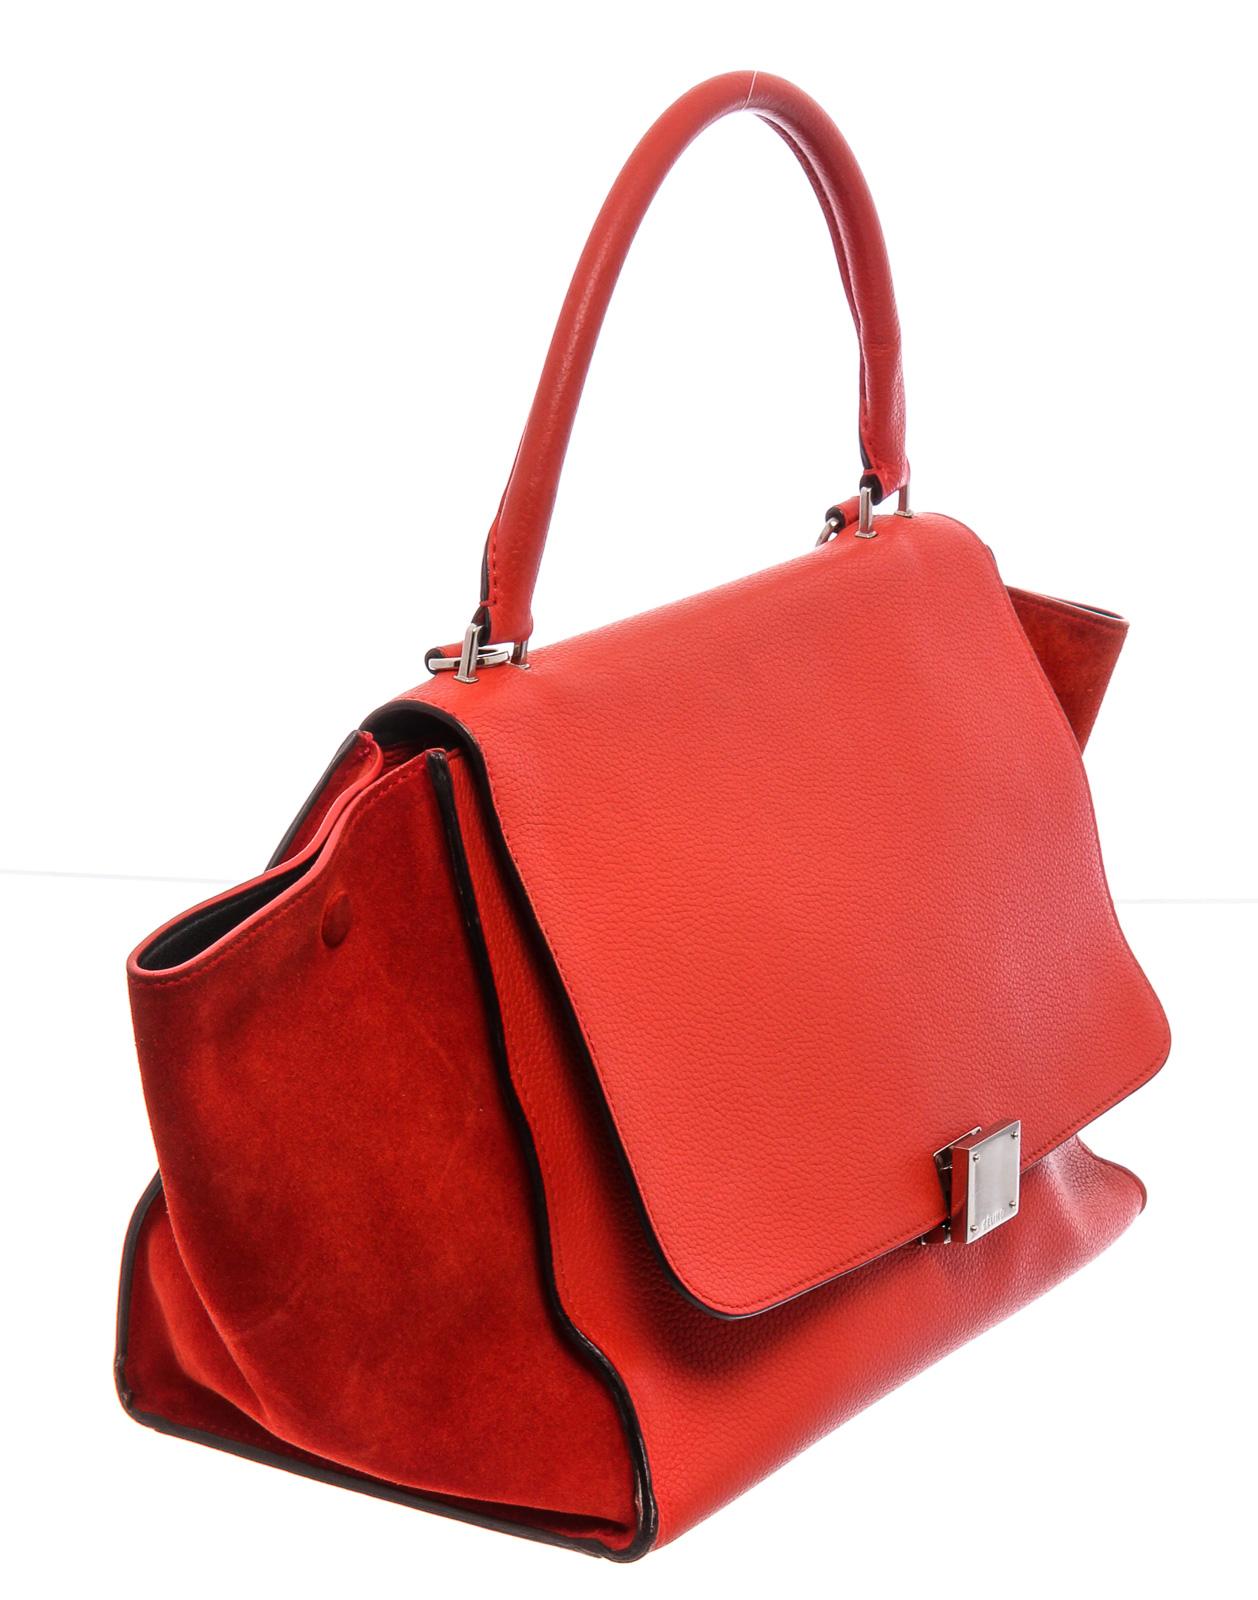 Women's Celine Red Leather Medium Trapeze Tote Bag